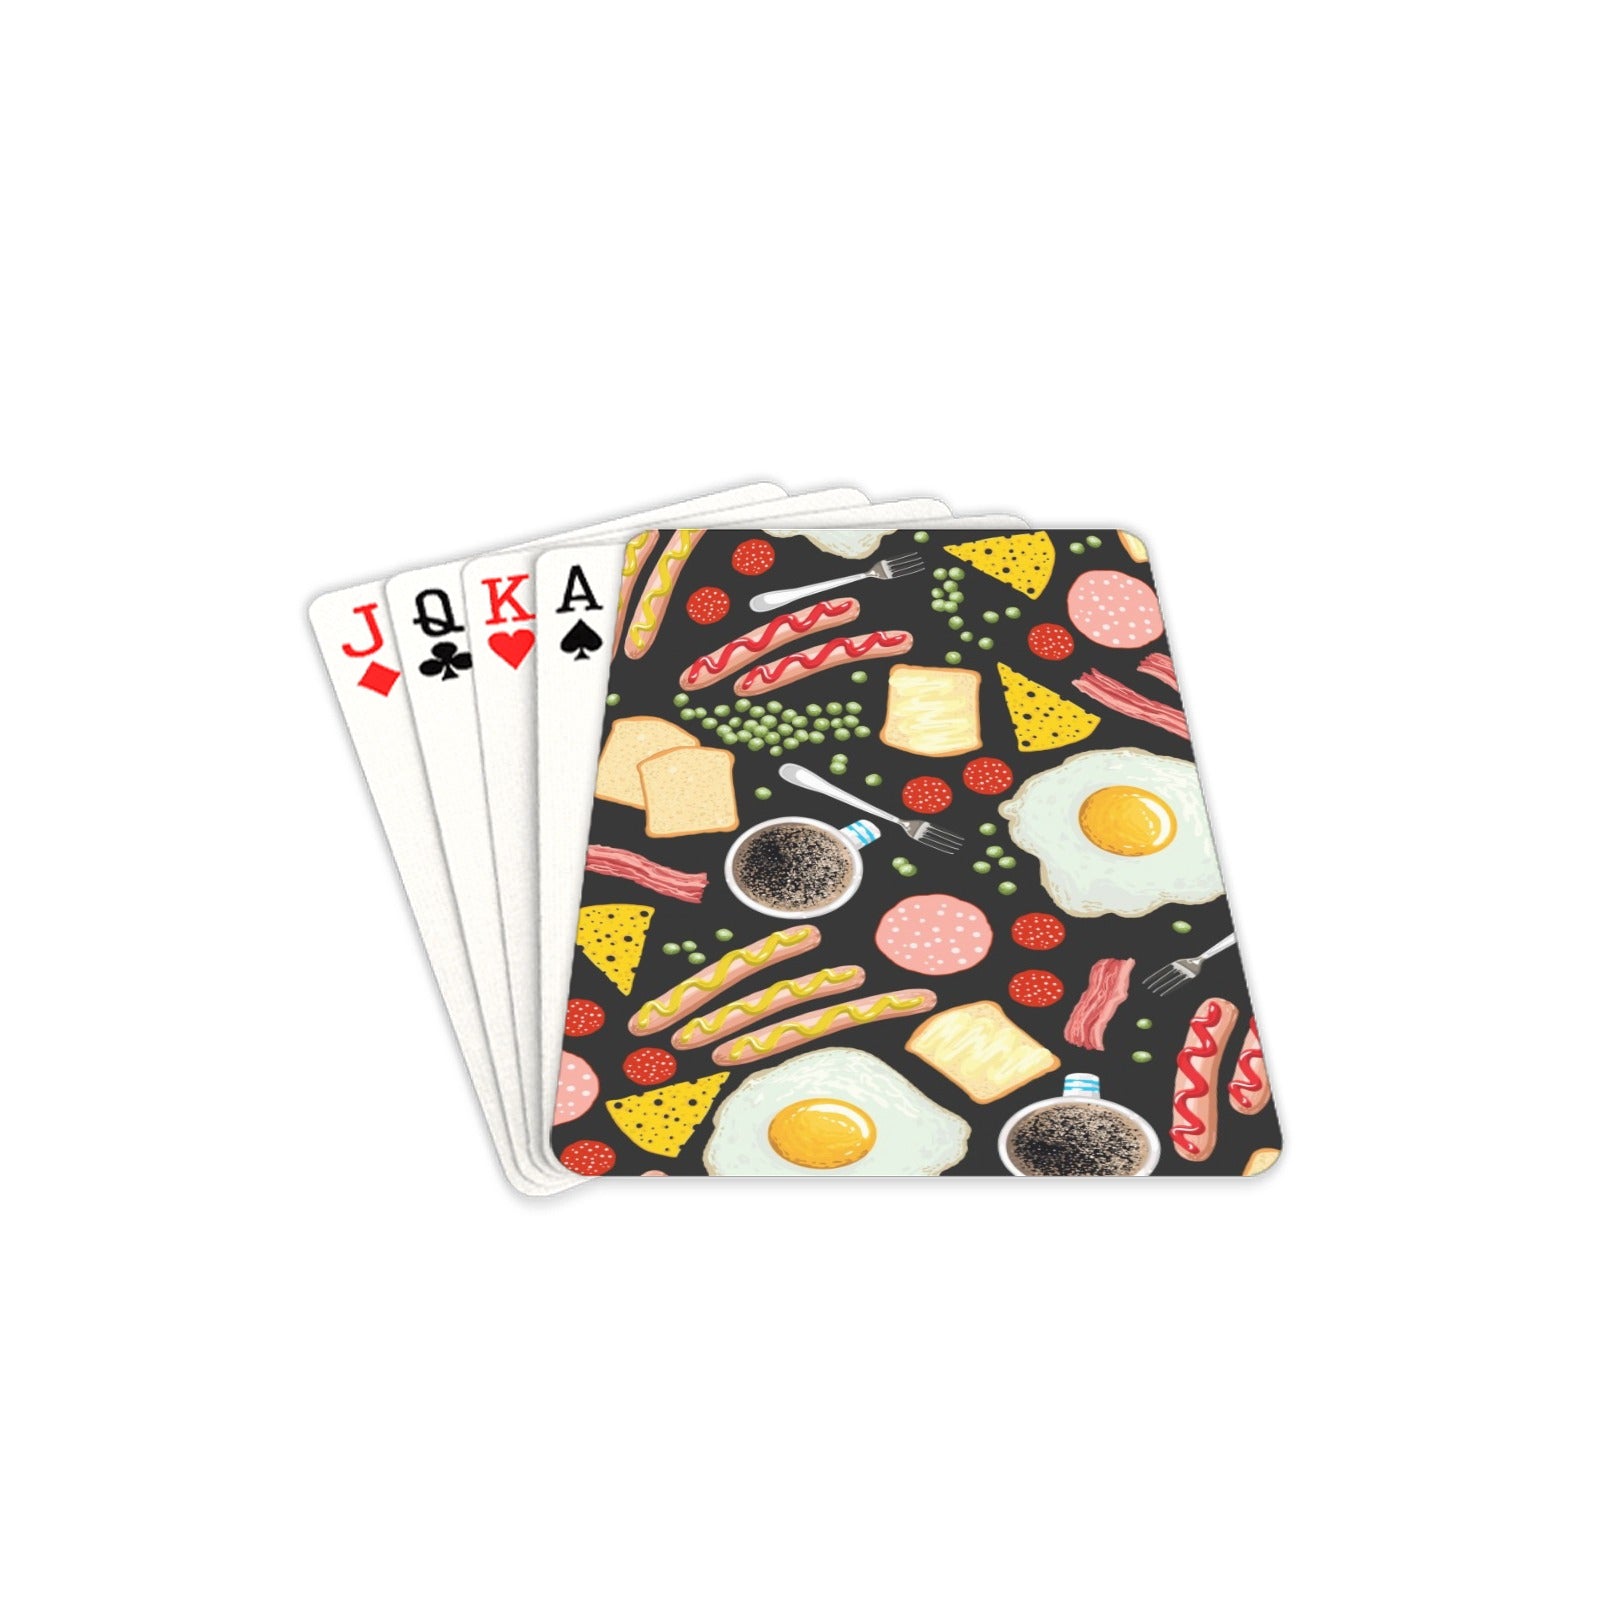 Breakfast Food - Playing Cards 2.5"x3.5" Playing Card 2.5"x3.5"